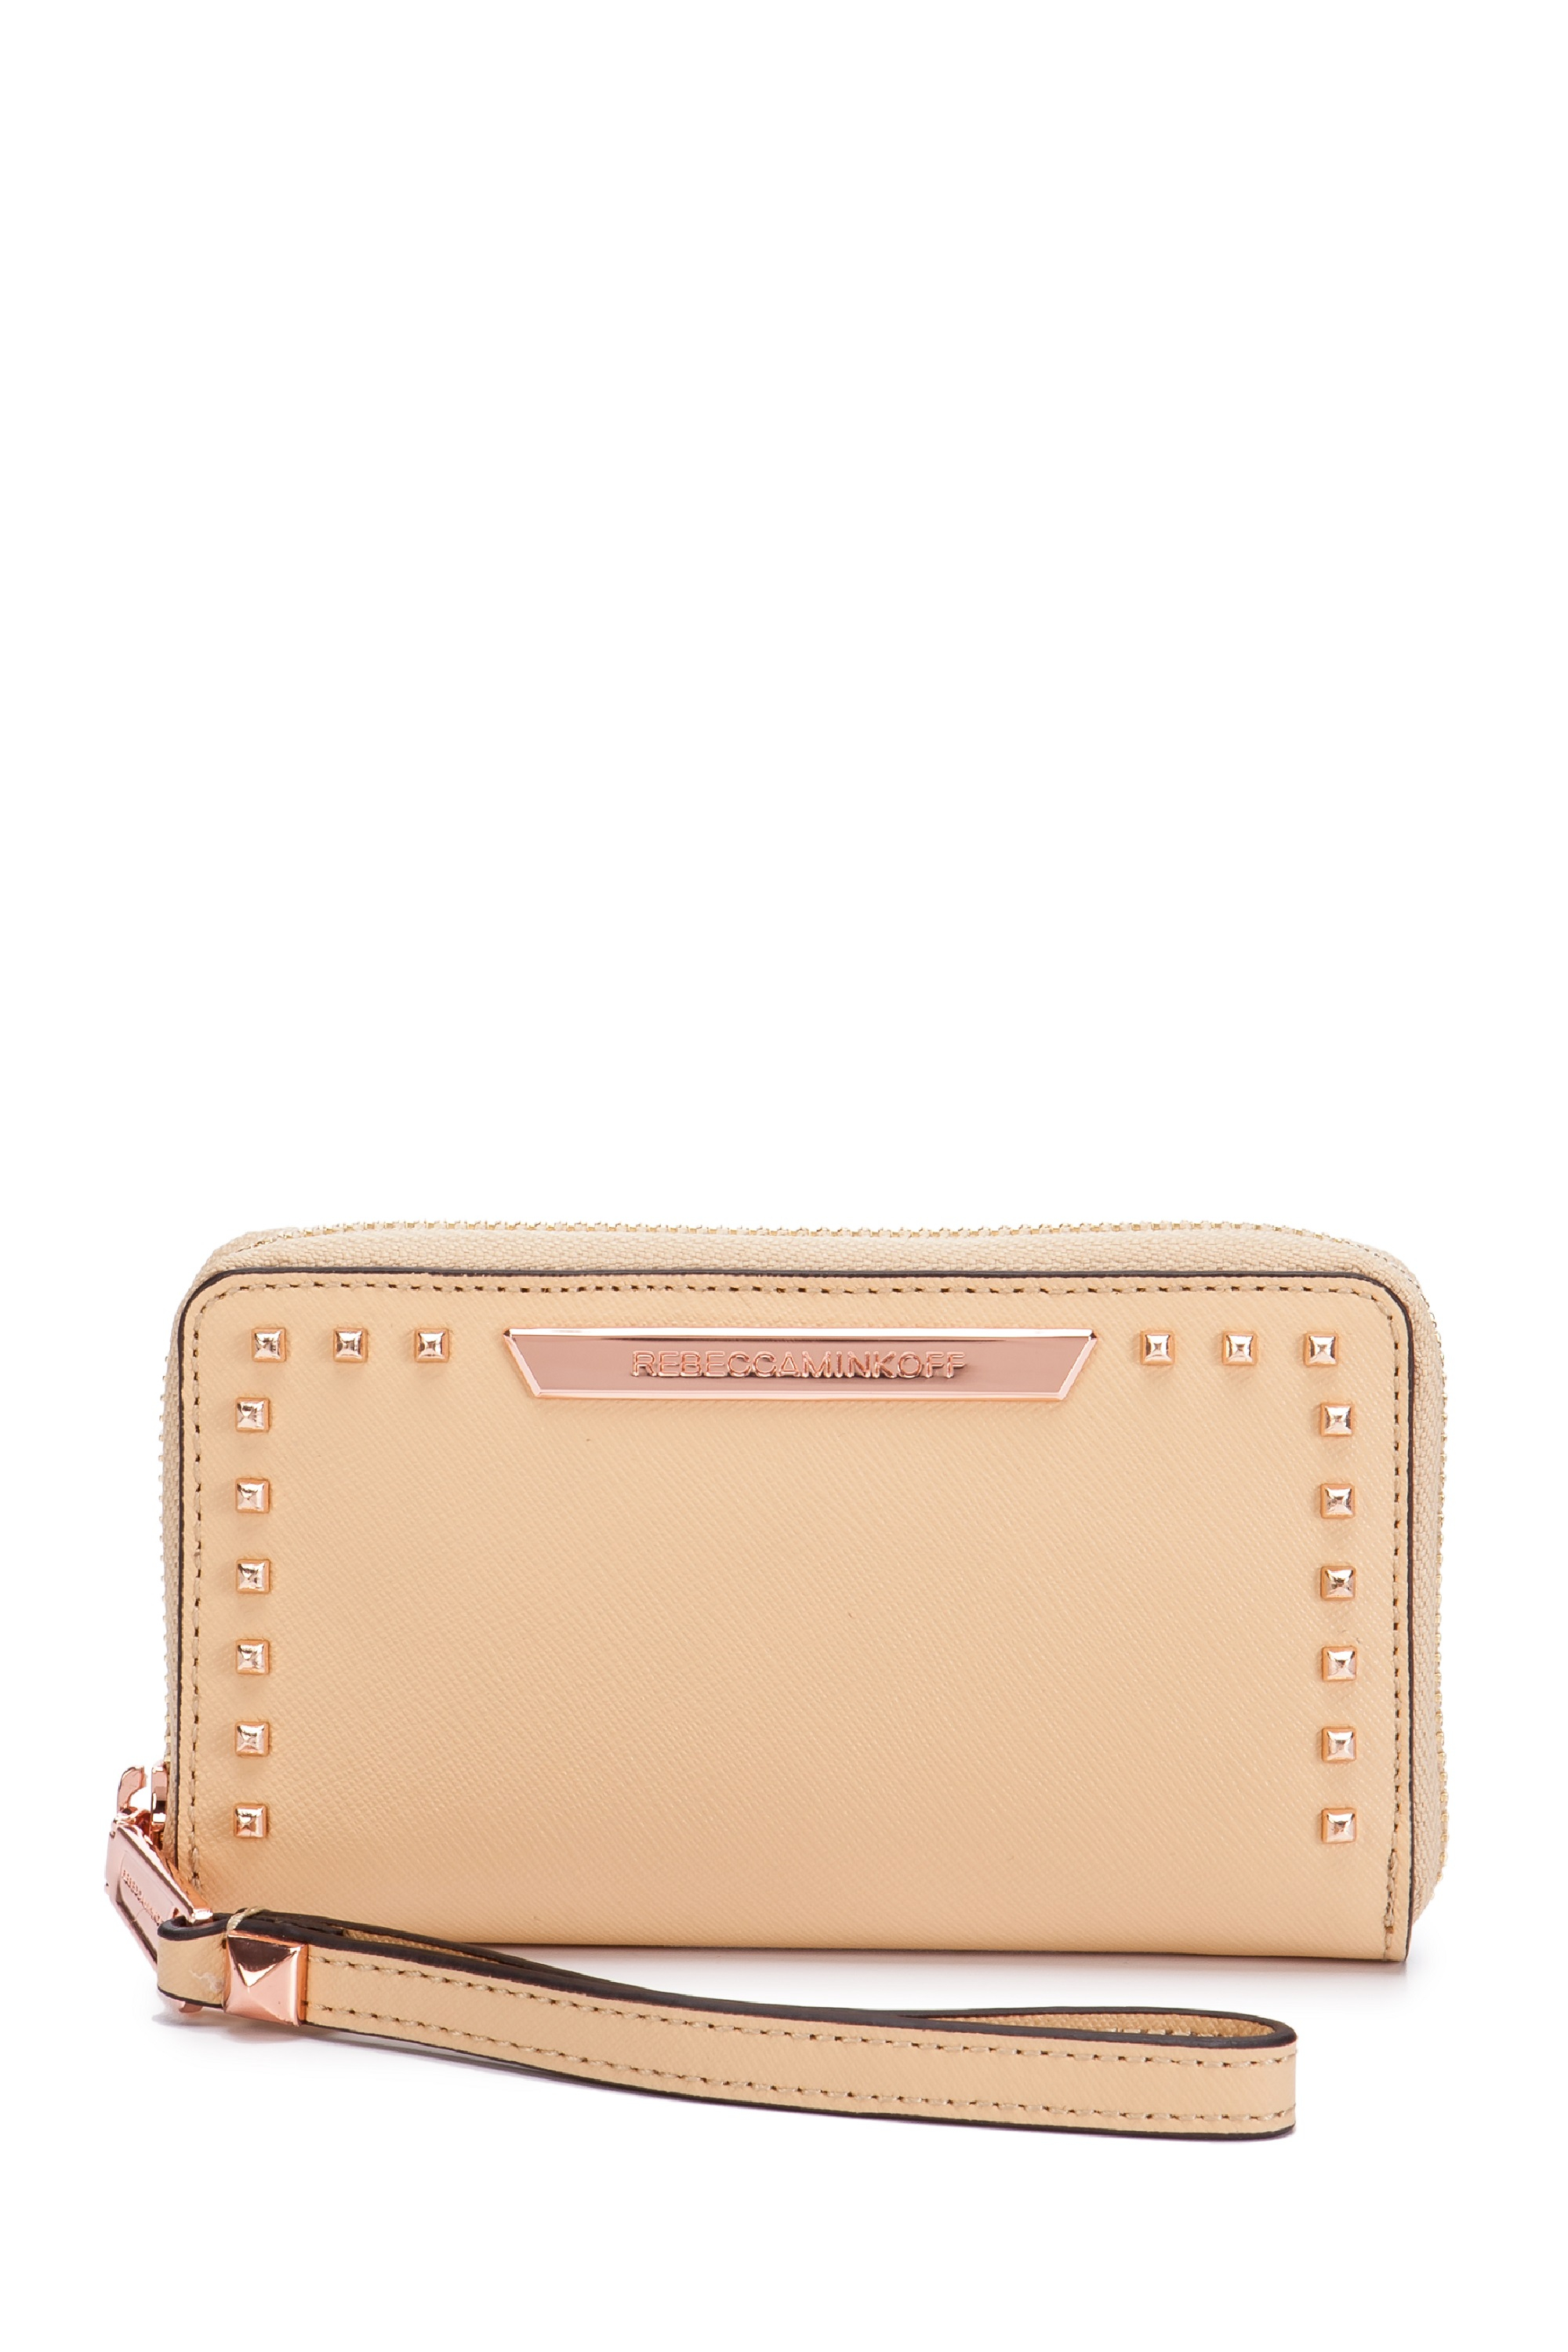 Rebecca minkoff Olivia Tech Wallet in Natural | Lyst